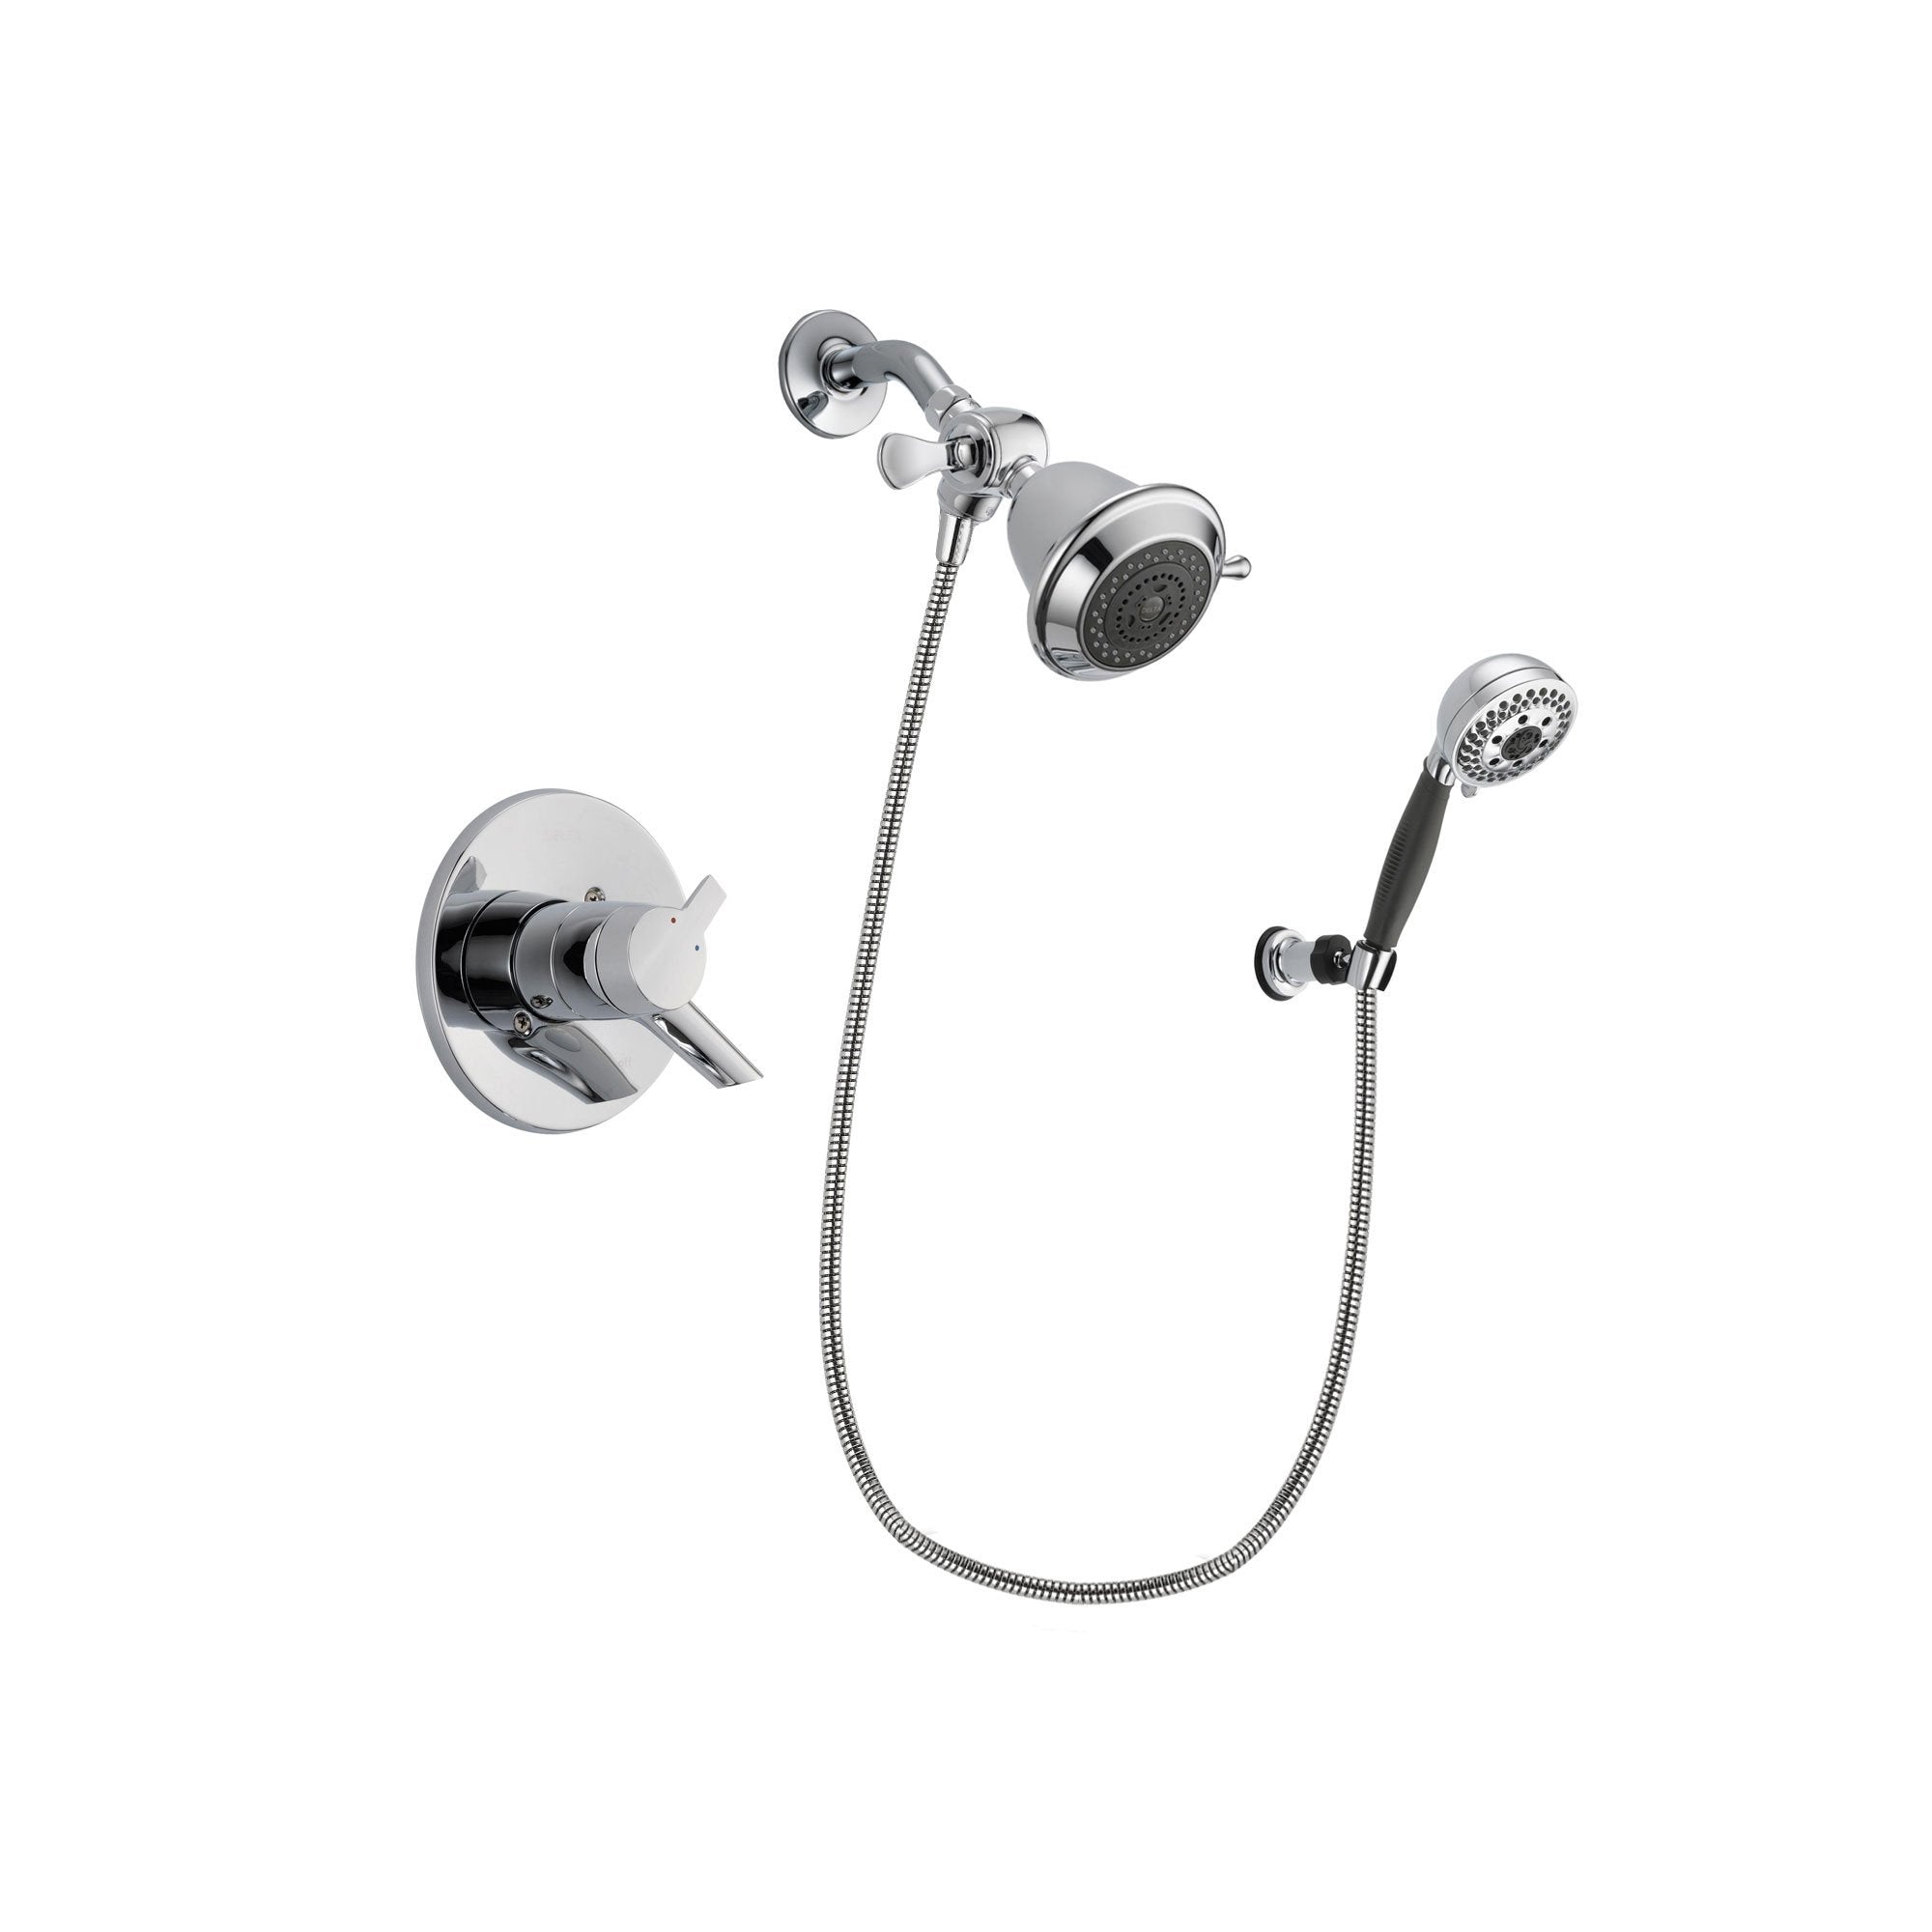 Delta Compel Chrome Shower Faucet System w/ Shower Head and Hand Shower DSP1130V